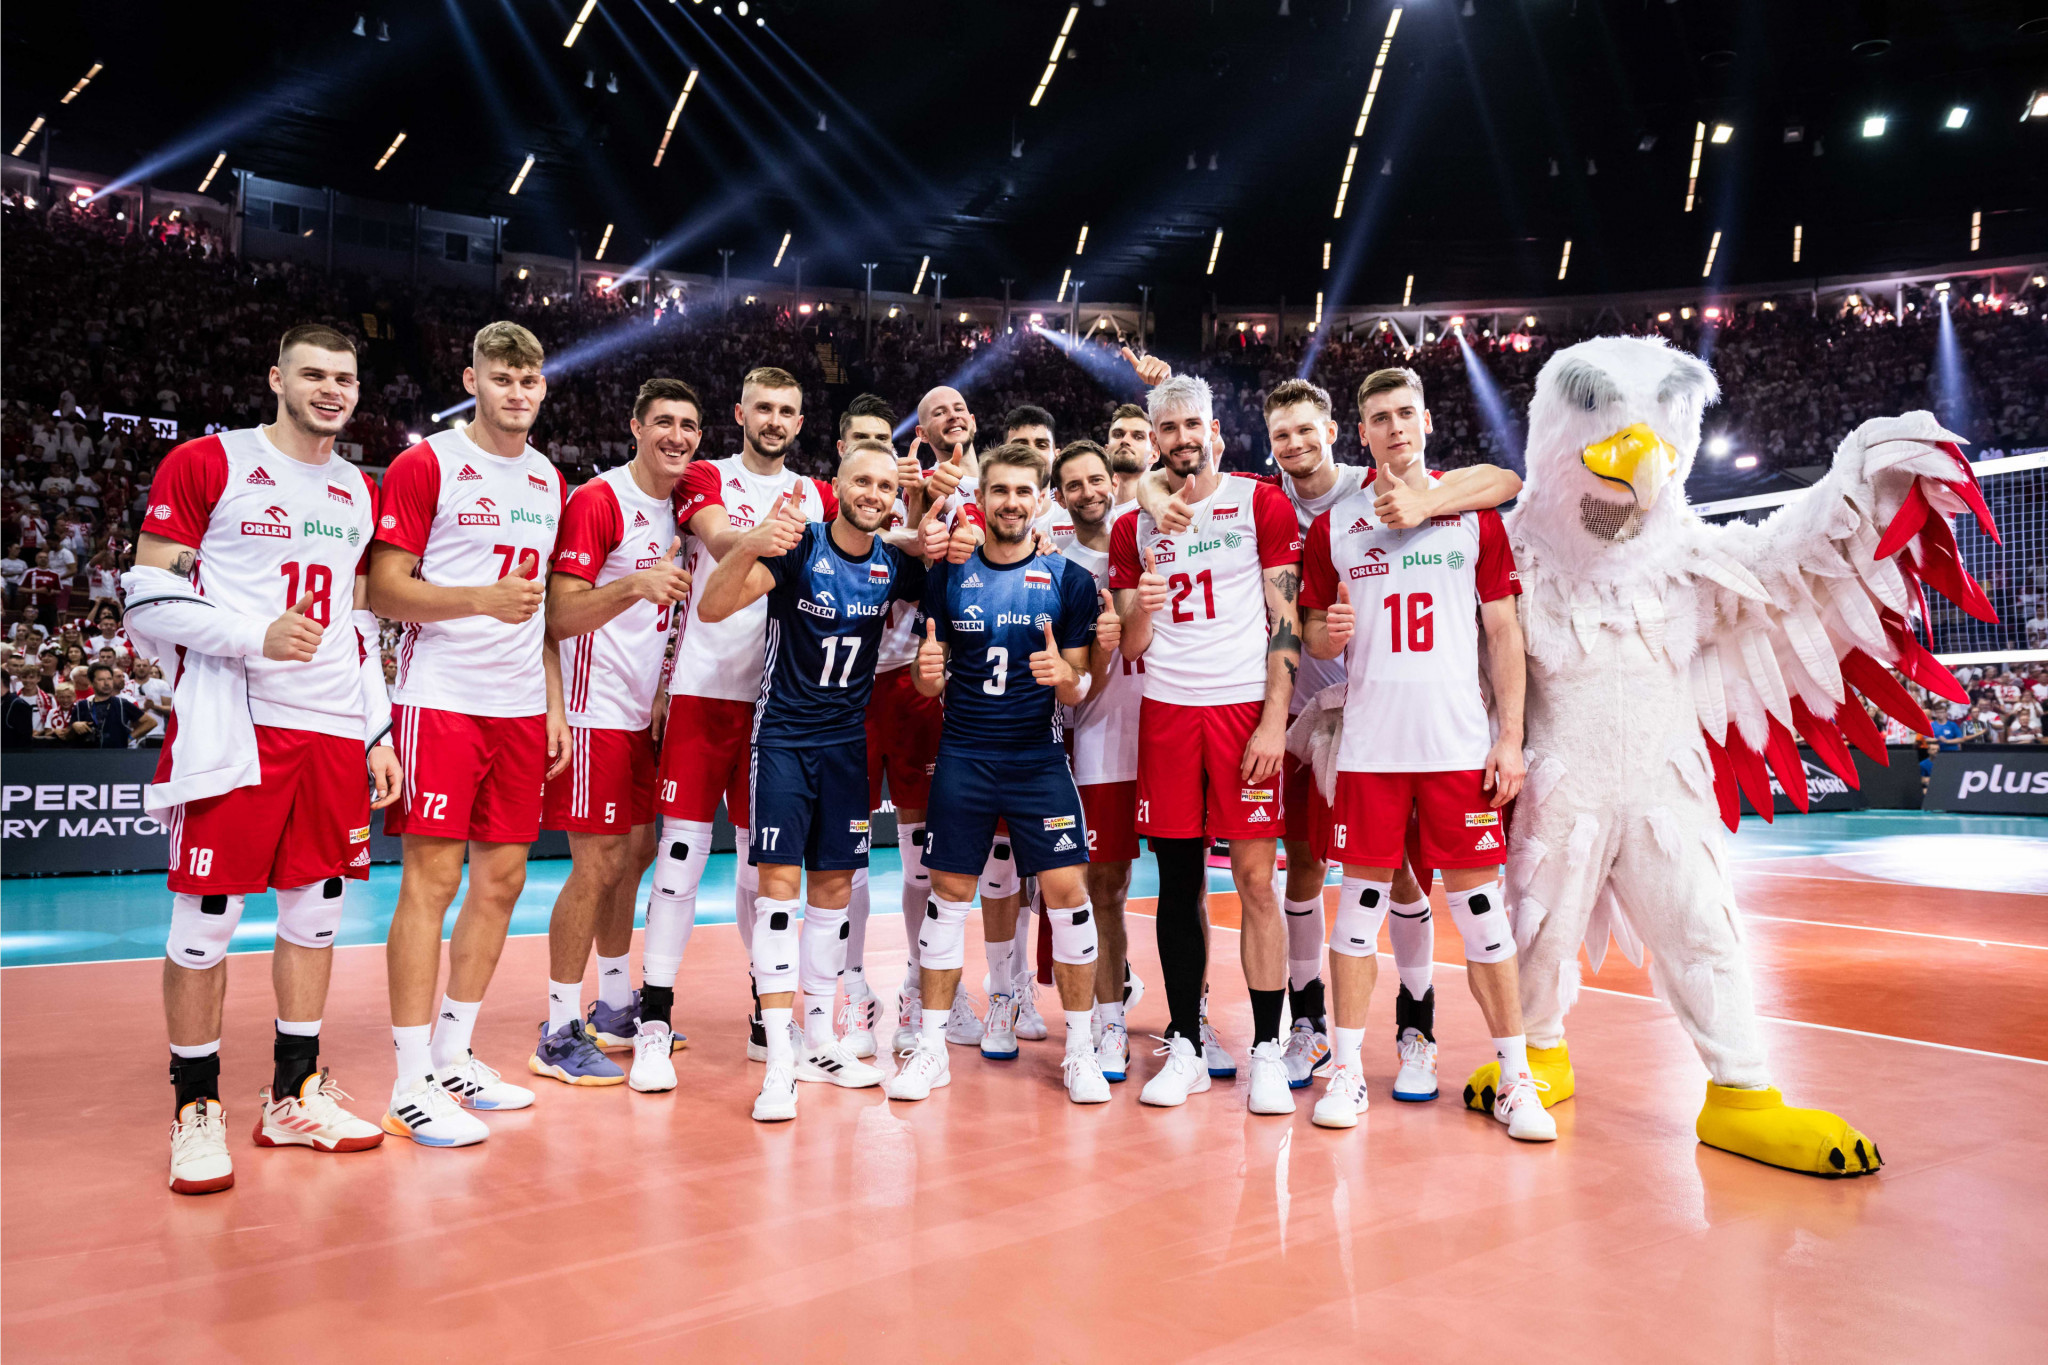 Holders Poland power past Bulgaria in Men's Volleyball World Championship opener